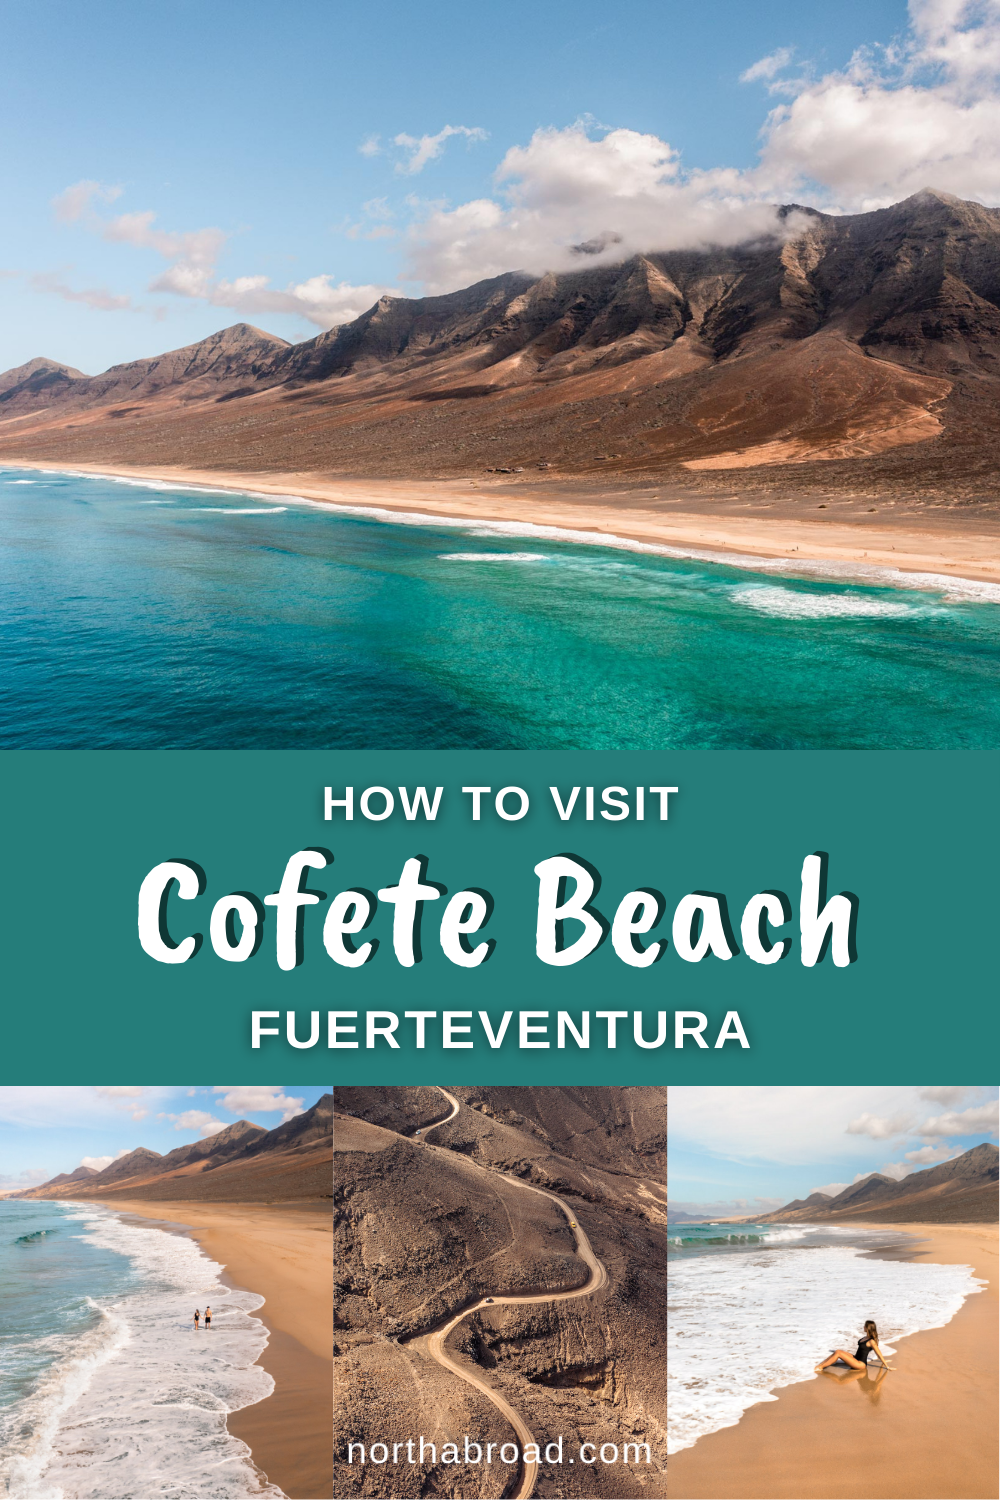 Cofete Beach is one of the best and most unique beaches in Fuerteventura. Here’s everything you need to know about getting there and making the most of your visit to Playa de Cofete in Jandia Natural Park.